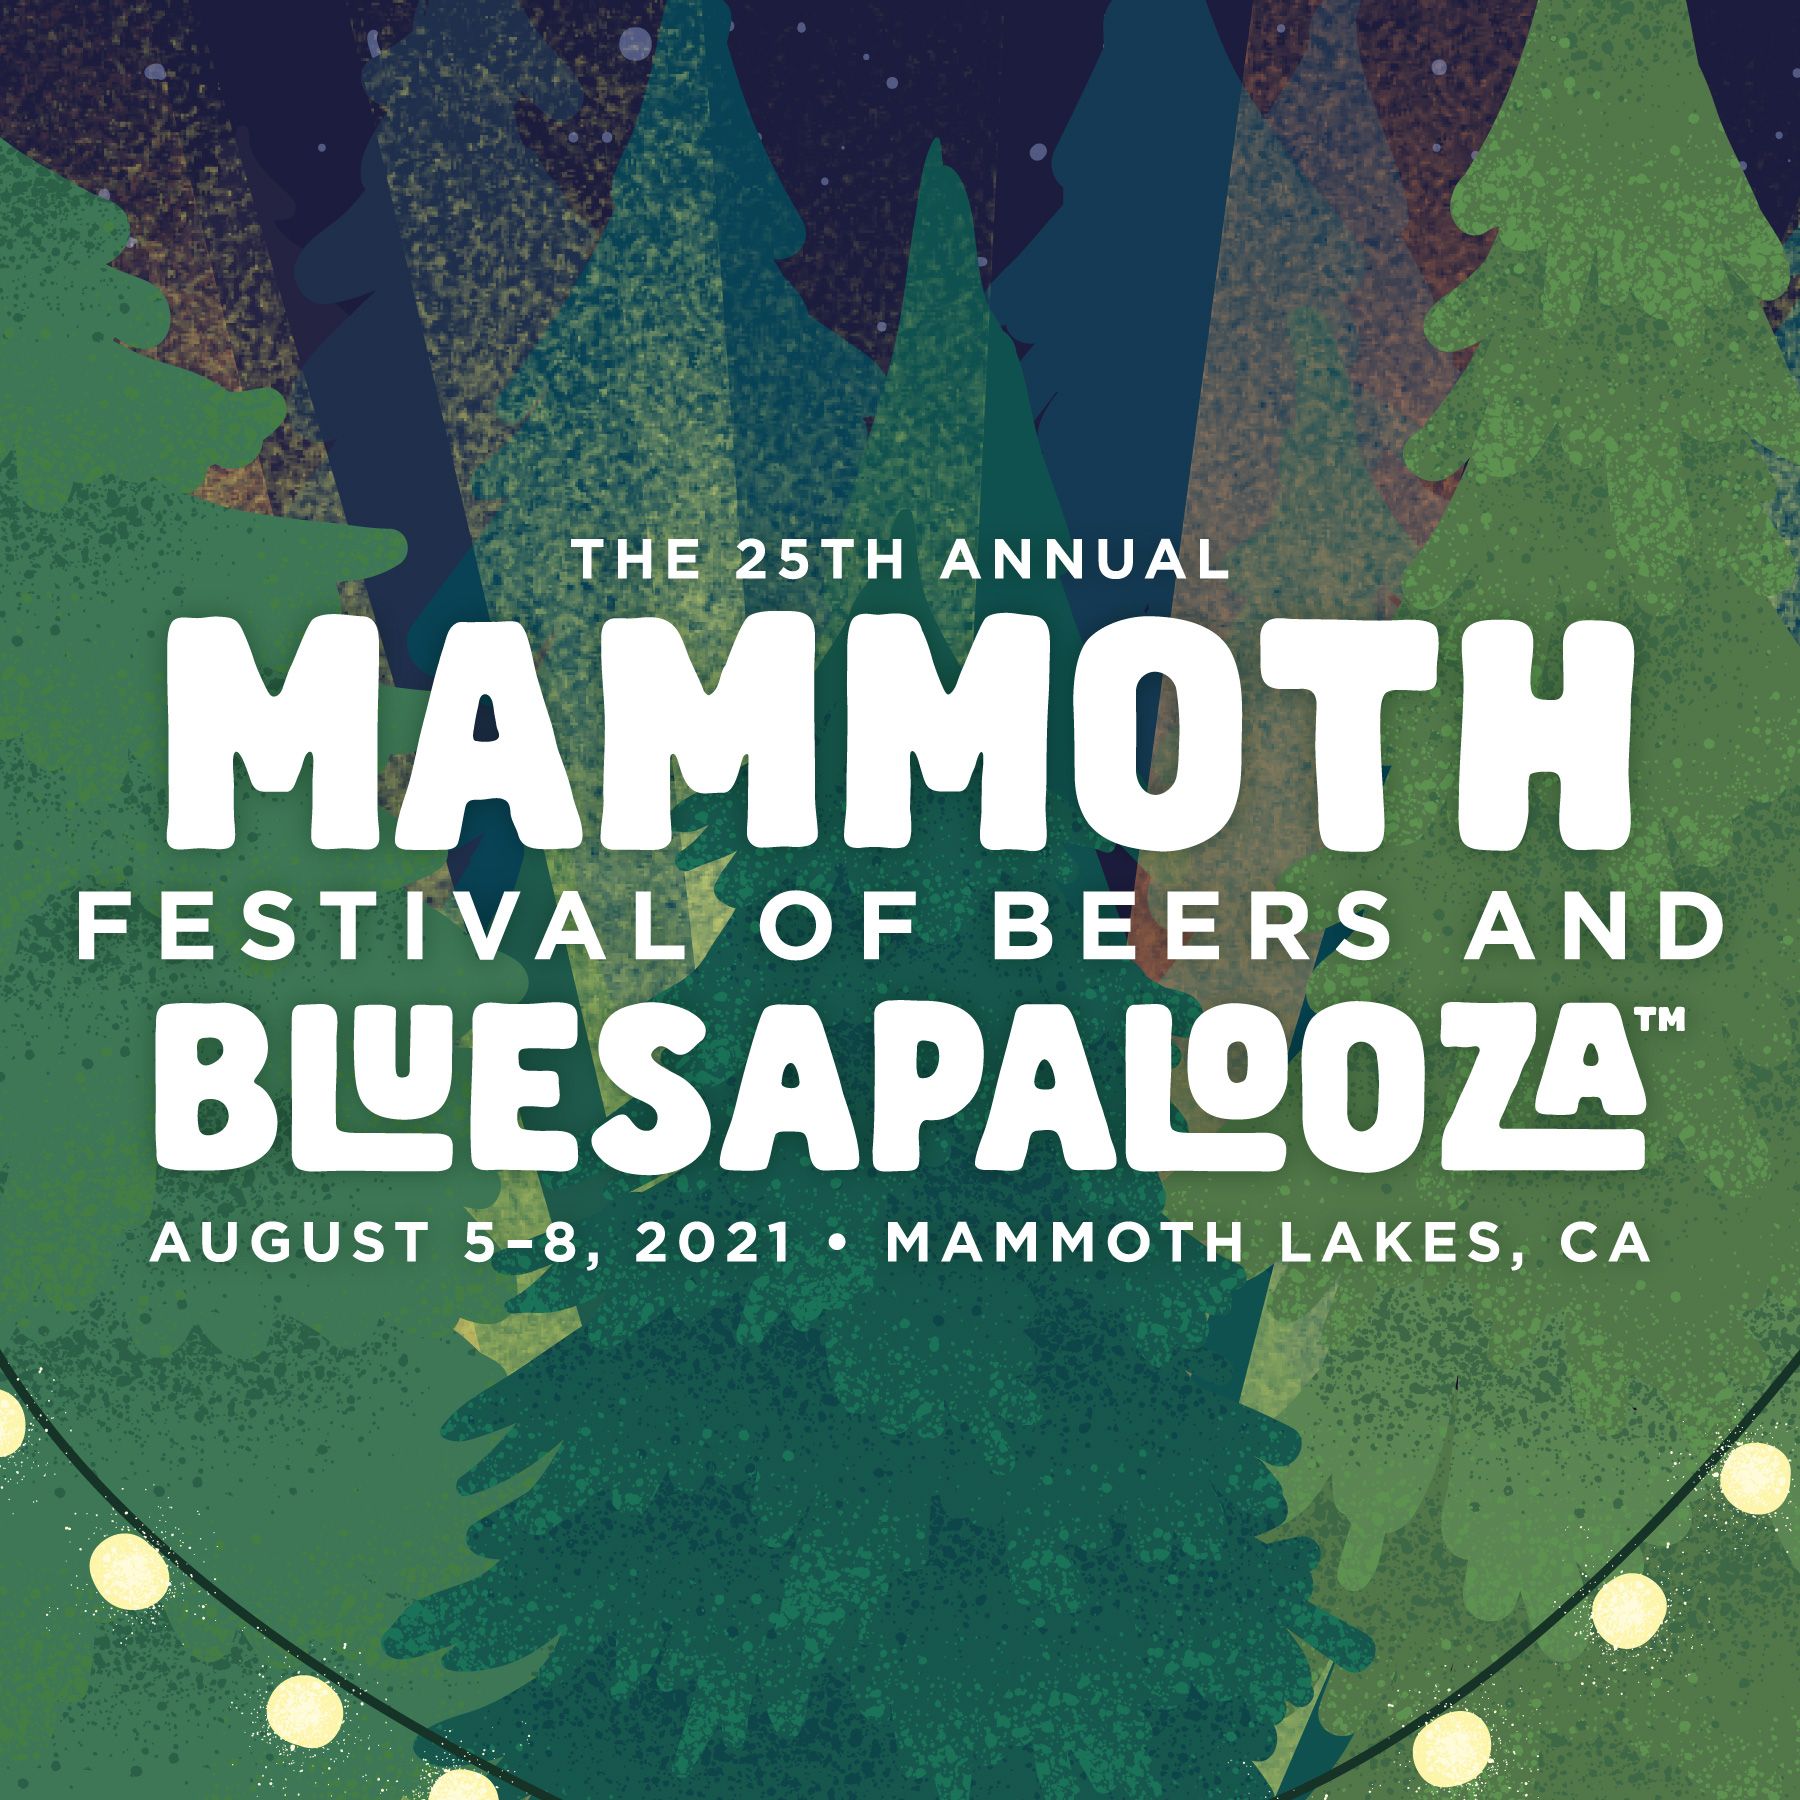 Everything You Need to Know About Mammoth Festival of Beers and